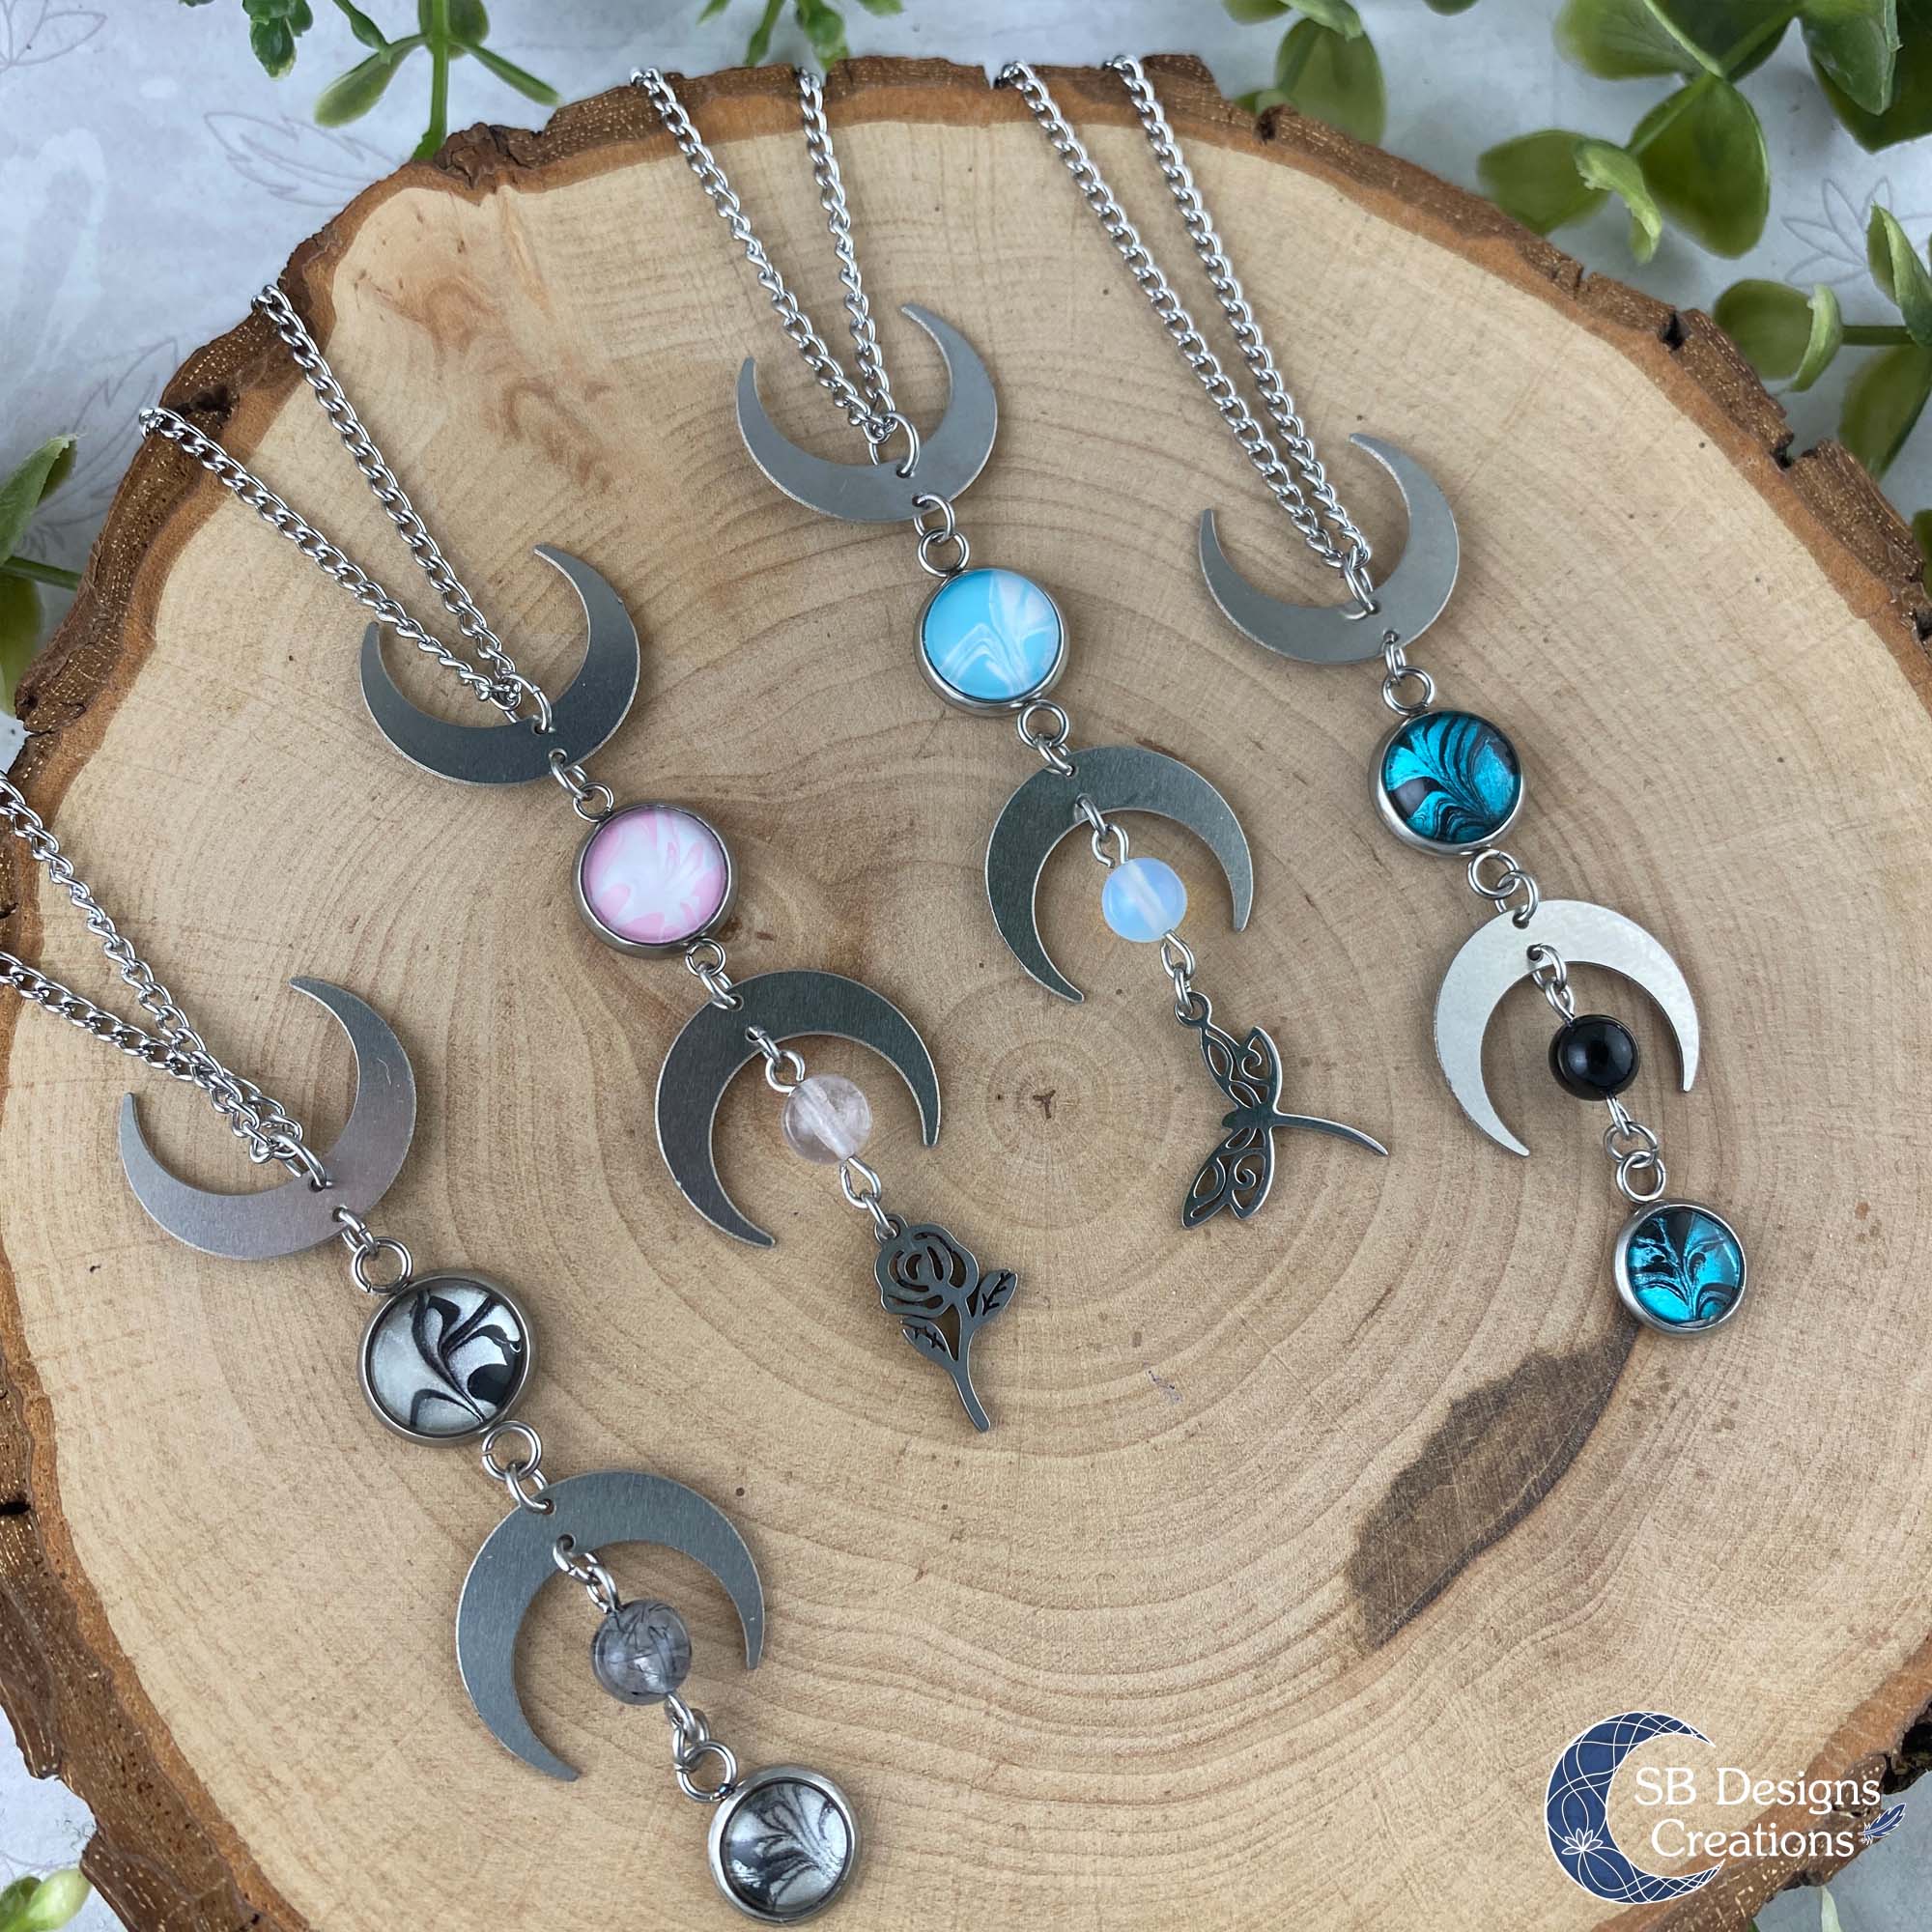 Triple Moon Moonphases stainless steel jewelry